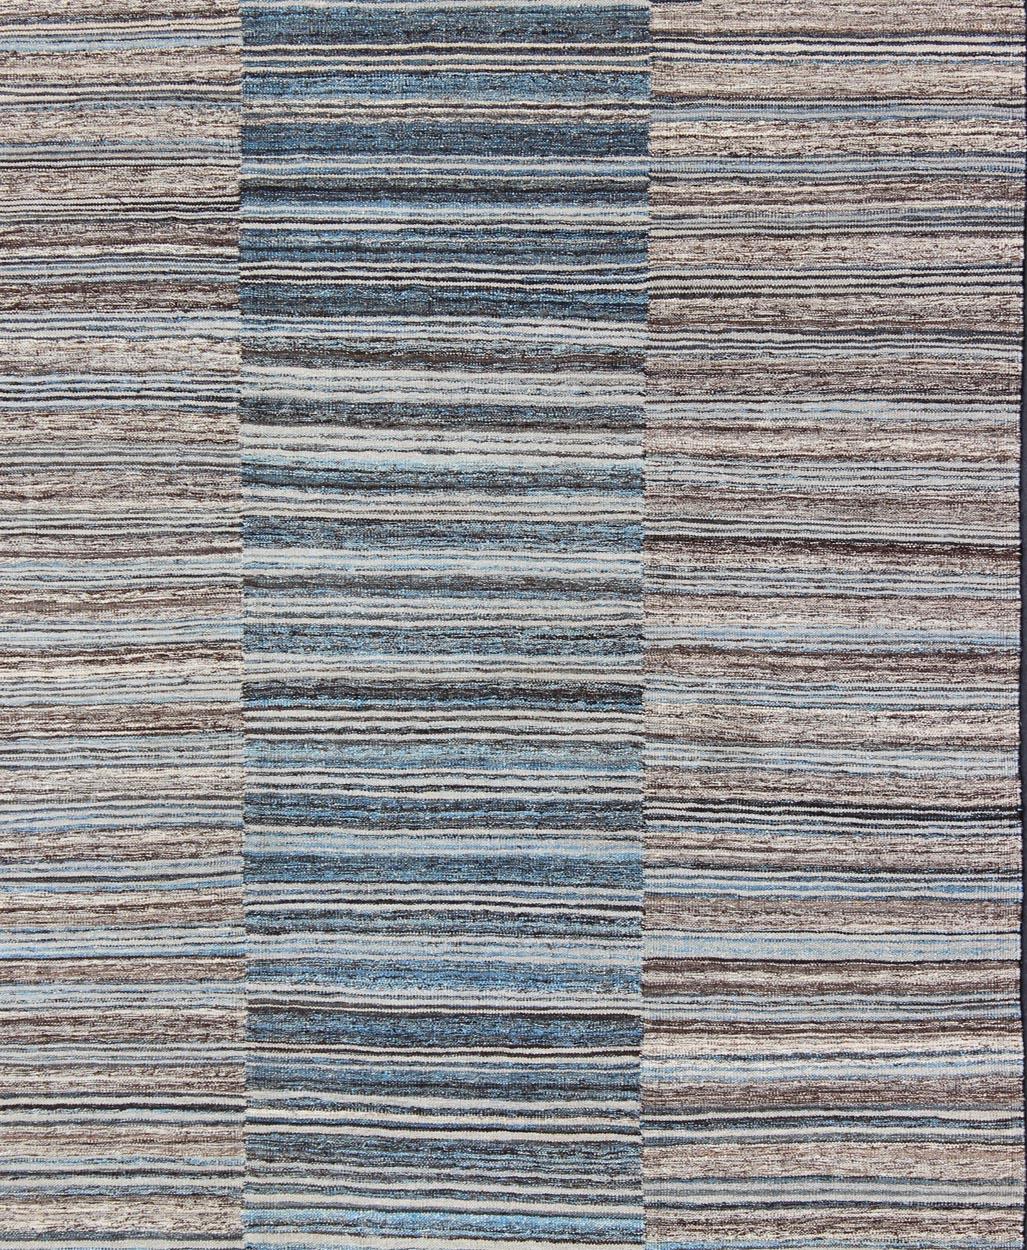 Modern flat-weave Kilim rug with stripes in shades of light blue, charcoal, blue, cream. Keivan Woven Arts Rug AFG-21579, country of origin / type: Afghanistan / Kilim

This flat-woven Kilim rug features a Classic stripe design that places